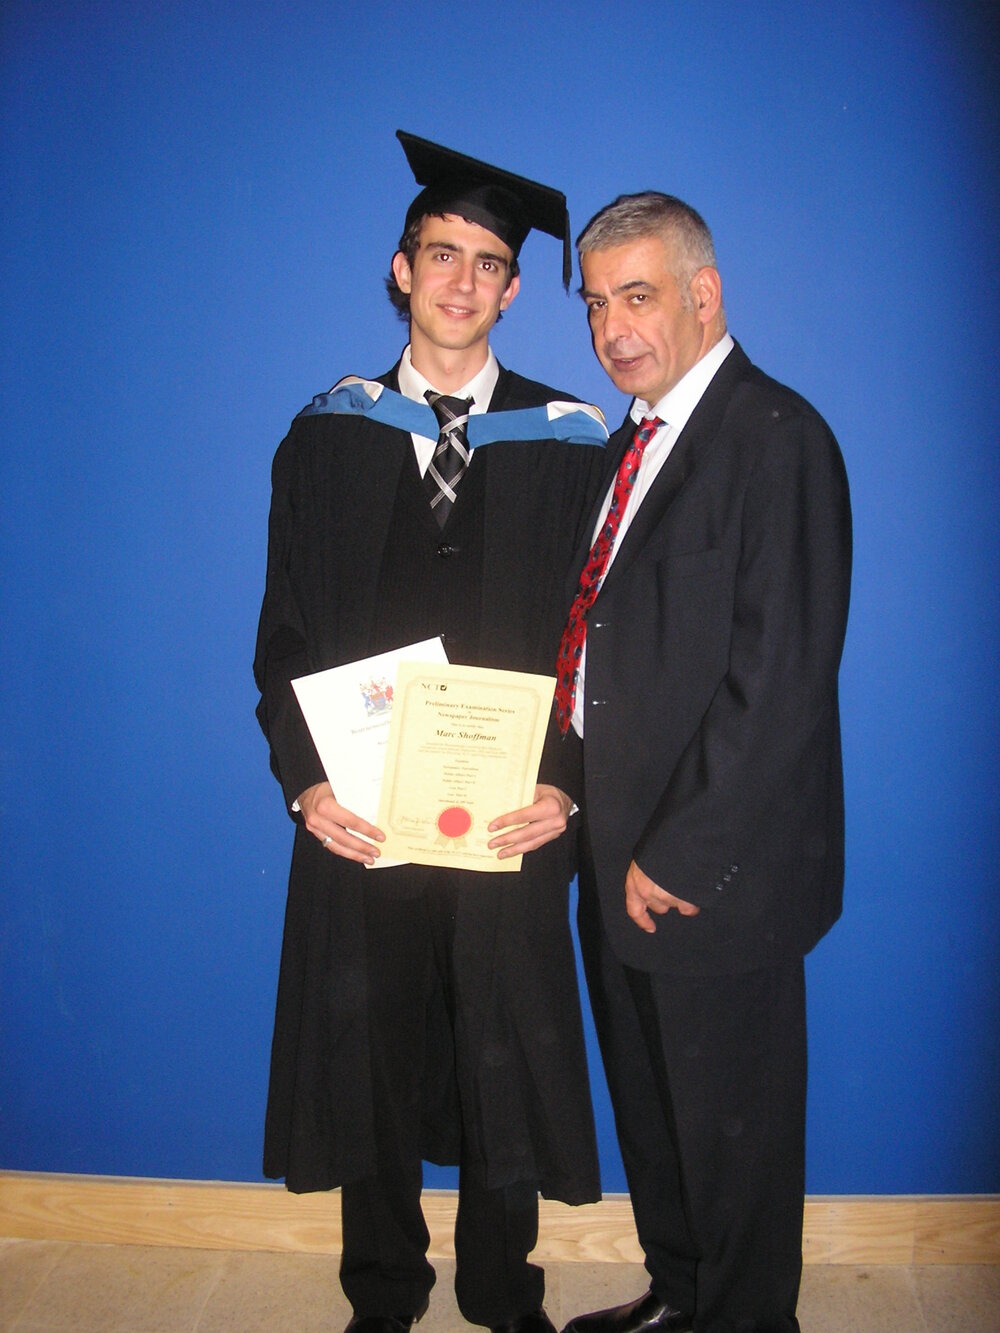 Marc at his graduation with dad Elan in 2005. Photo: Marc Shoffman